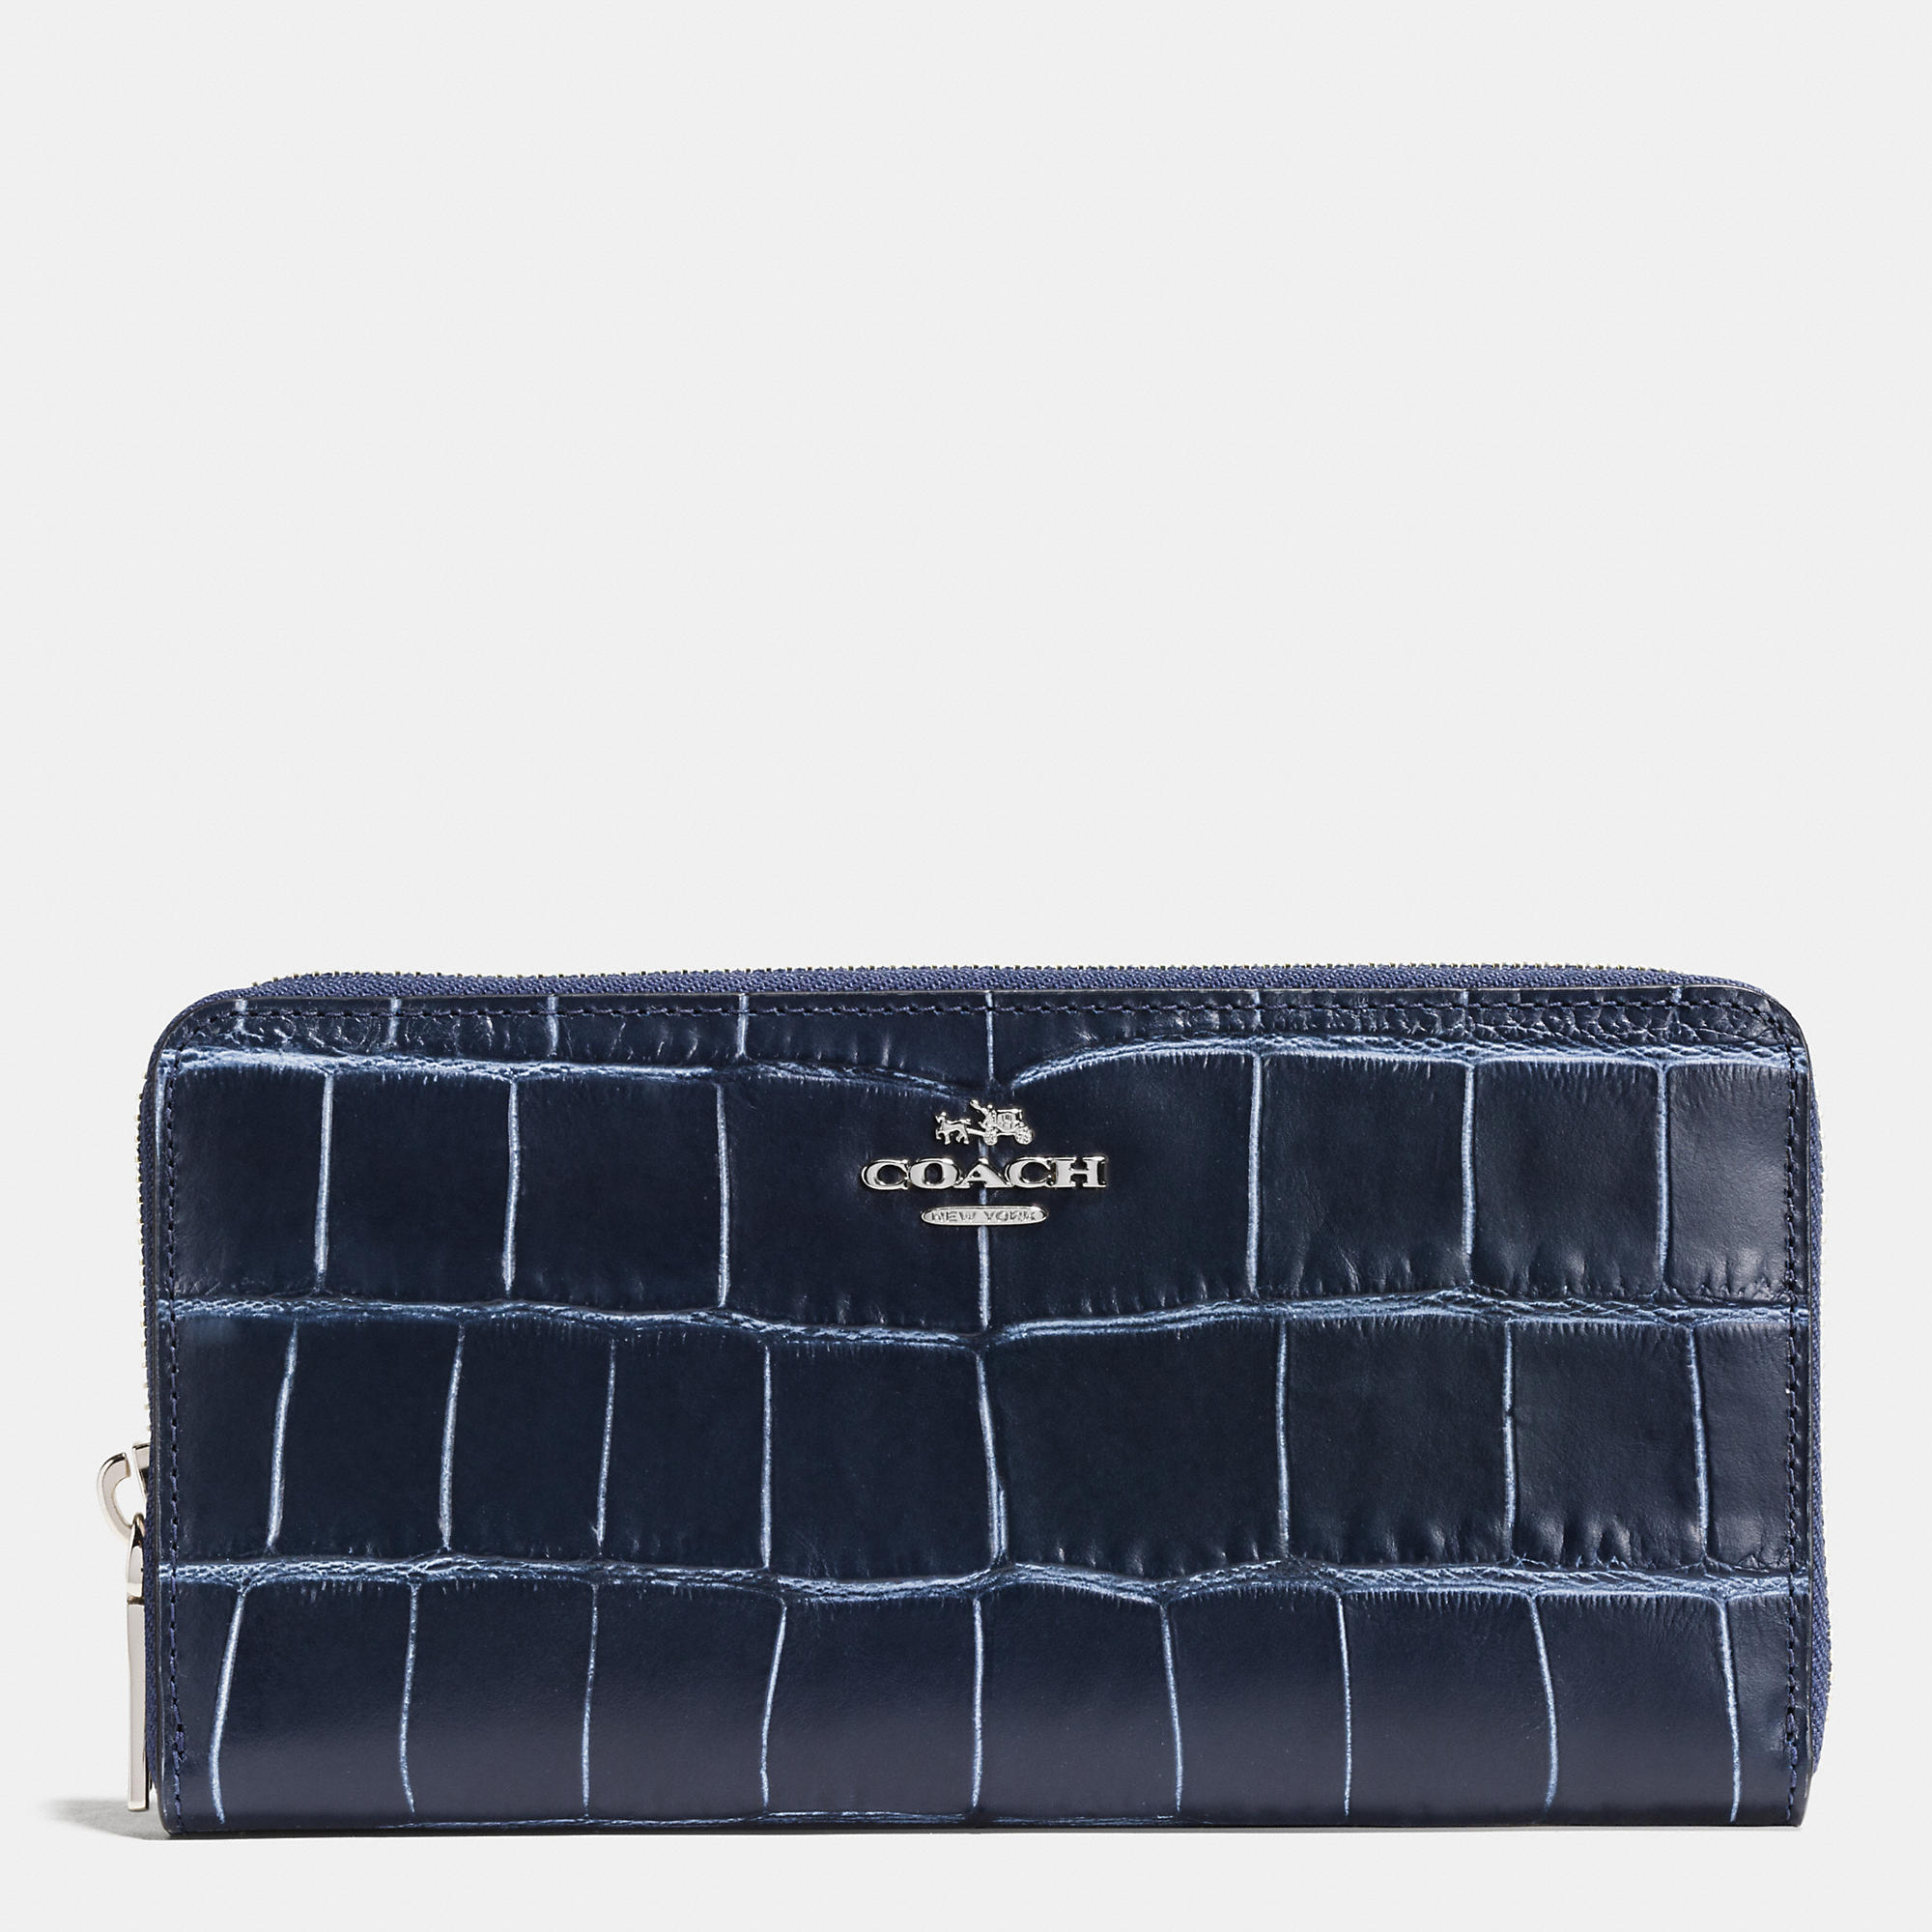 New Leather Coach Accordion Zip Wallet | Coach Outlet Canada